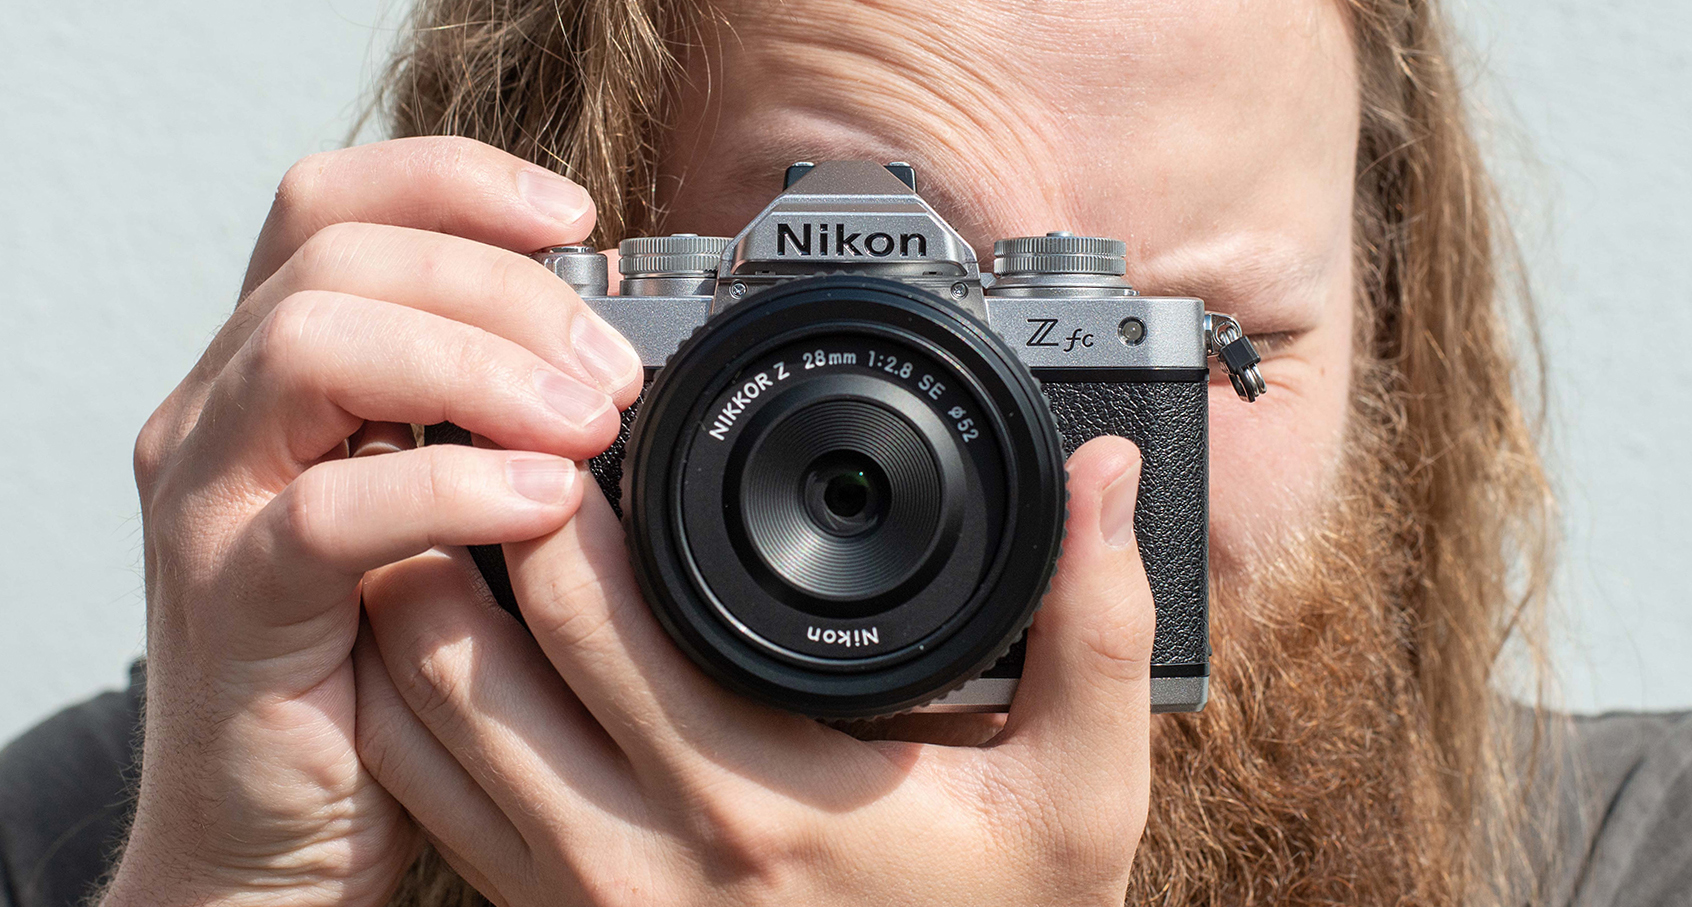 Nikon Z f review: Classy retro looks combined with premium